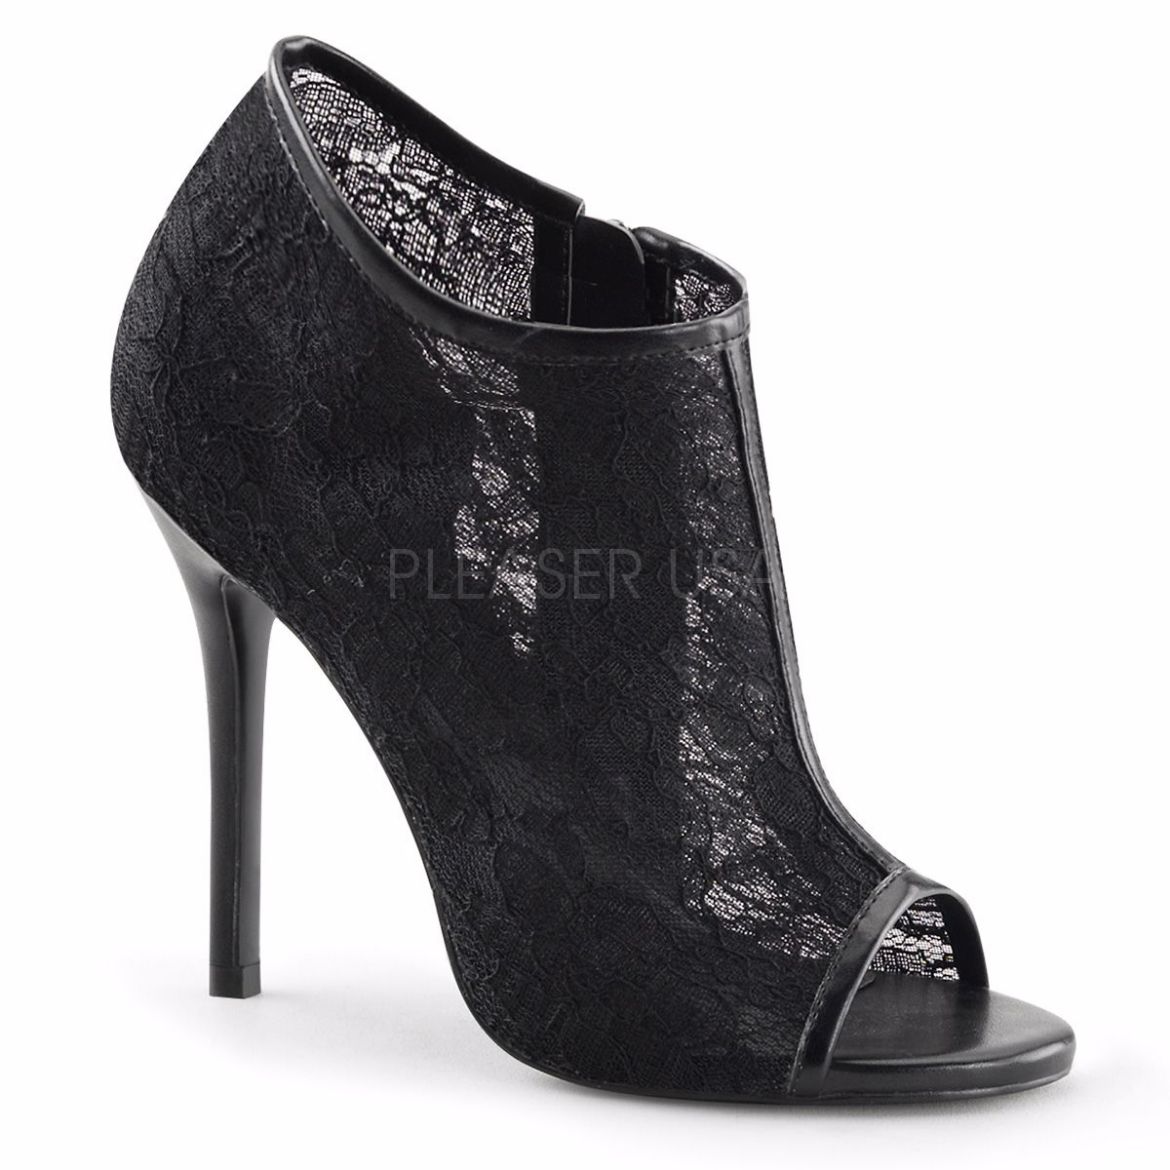 Product image of Fabulicious Amuse-56 Black Lace-Mesh, 5 inch (12.7 cm) Heel, Sandal Shoes